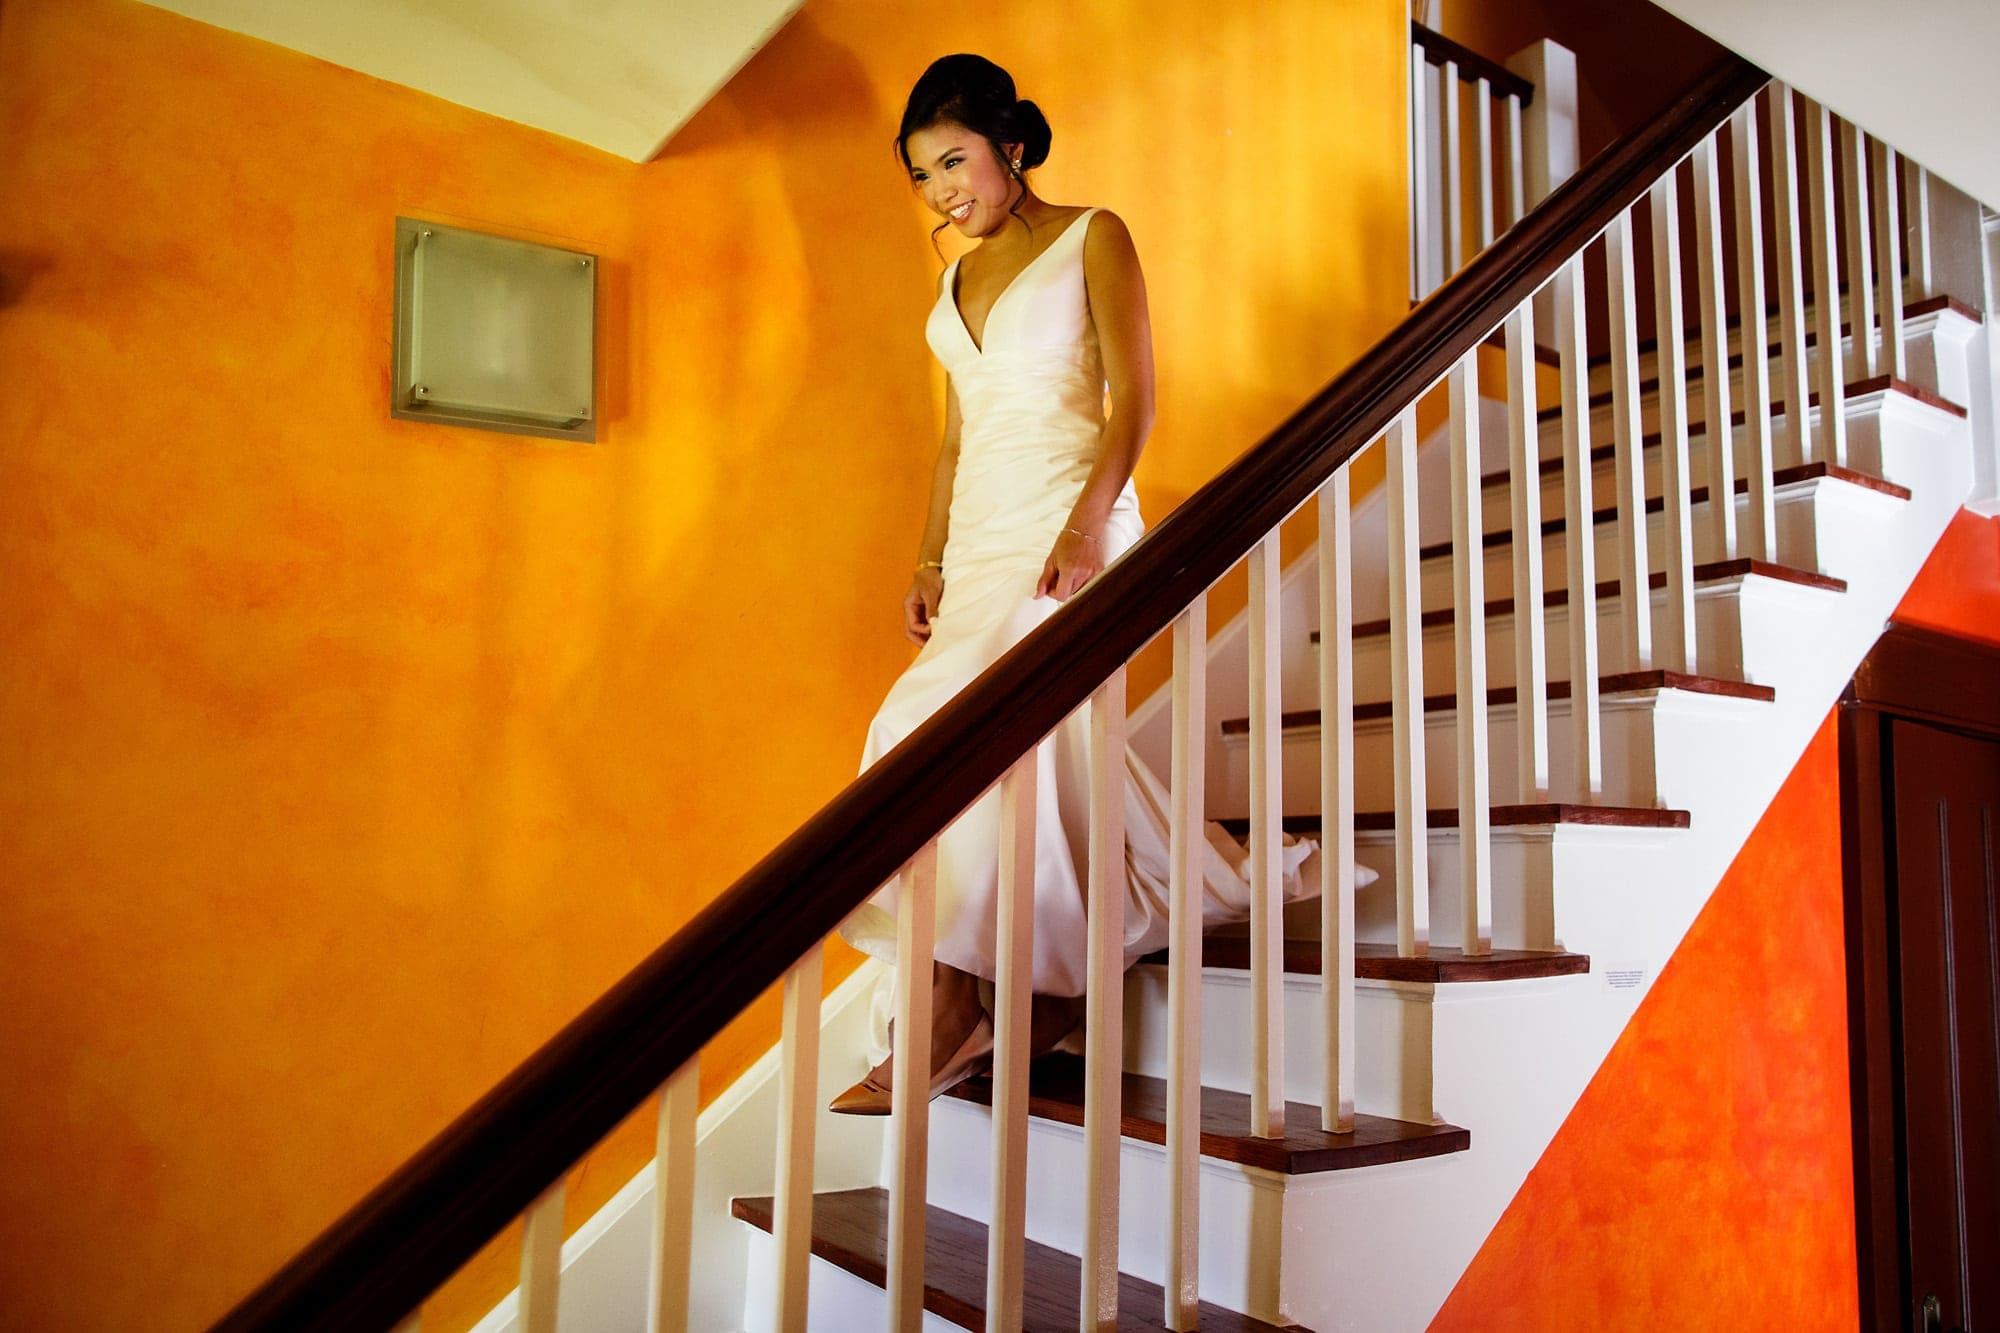 Megan walks down the stairs for the first time in her wedding dress at an Air BnB home in Boulder